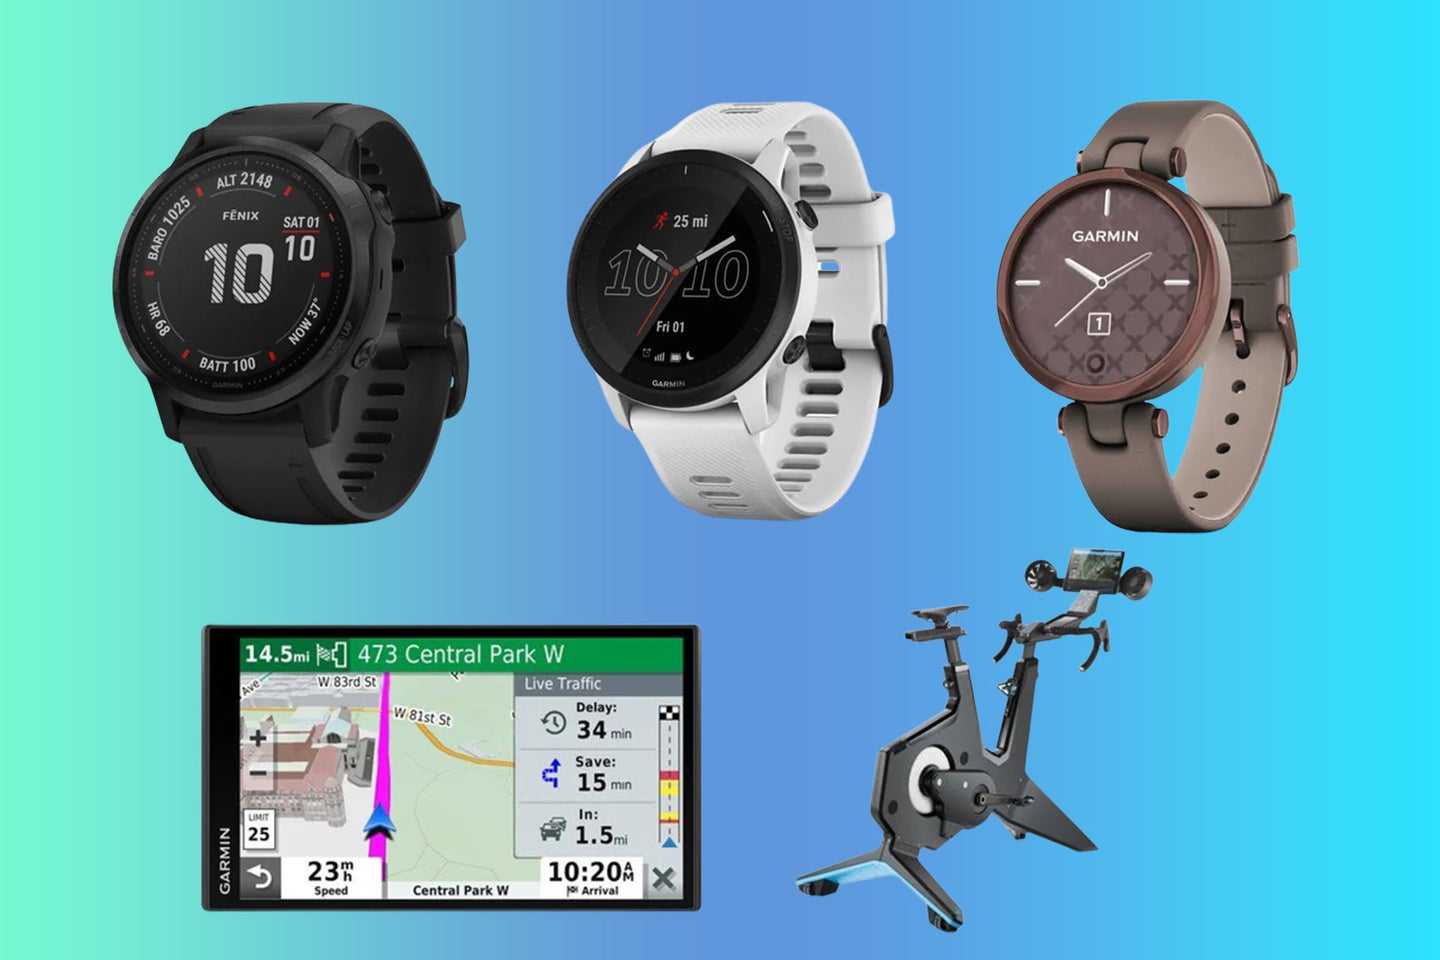 A lineup of garmin watches and other products on a blue and green gradient background